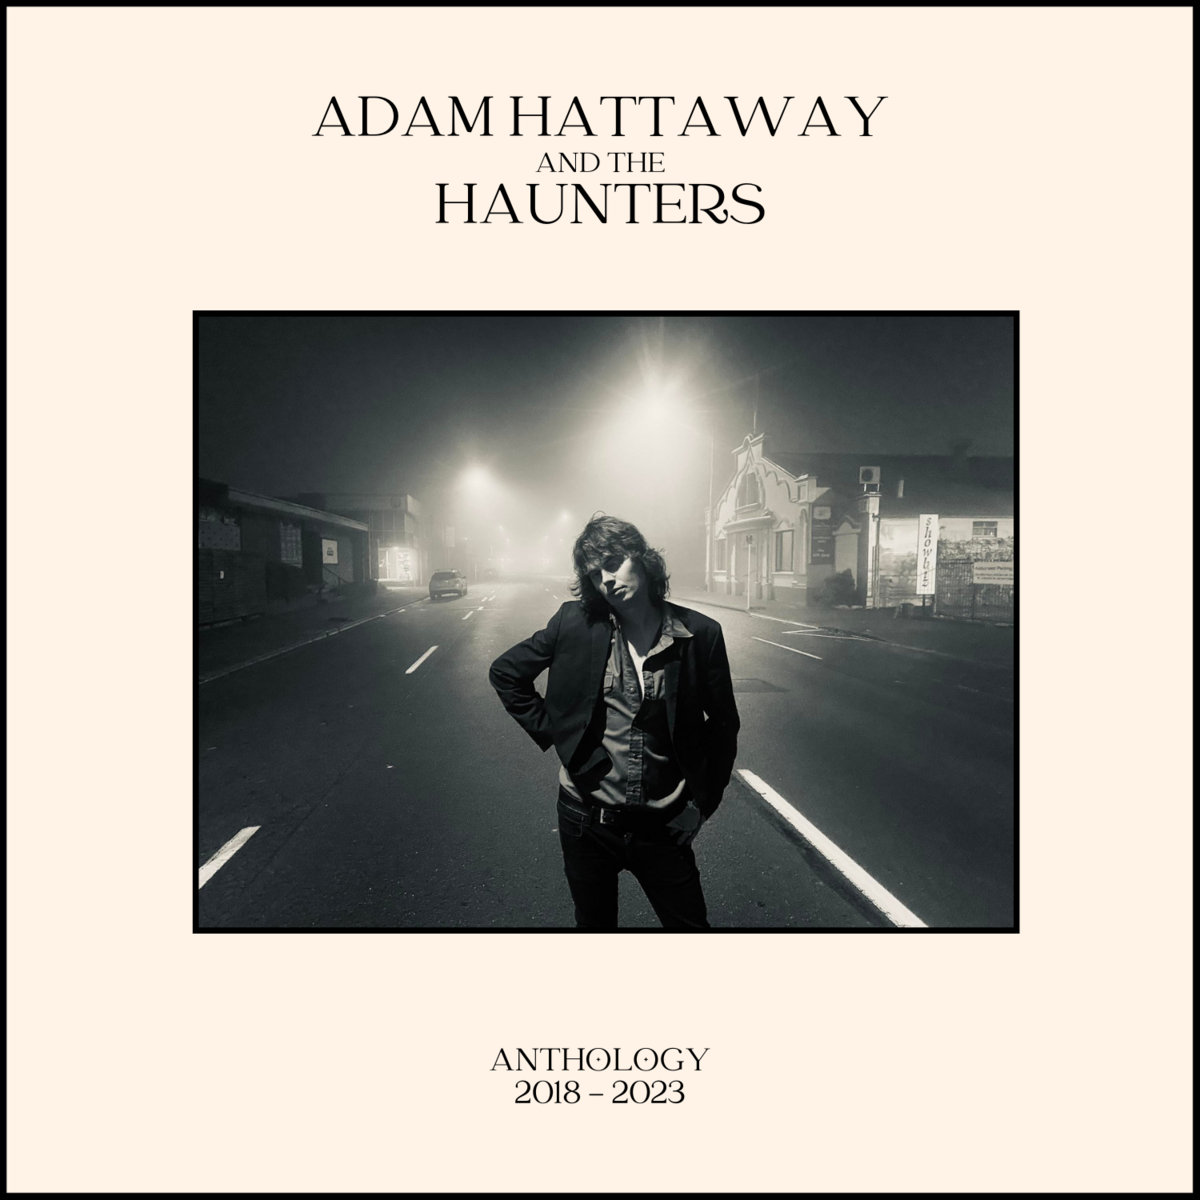 Anthology 2018-2023 | Adam Hattaway and the Haunters